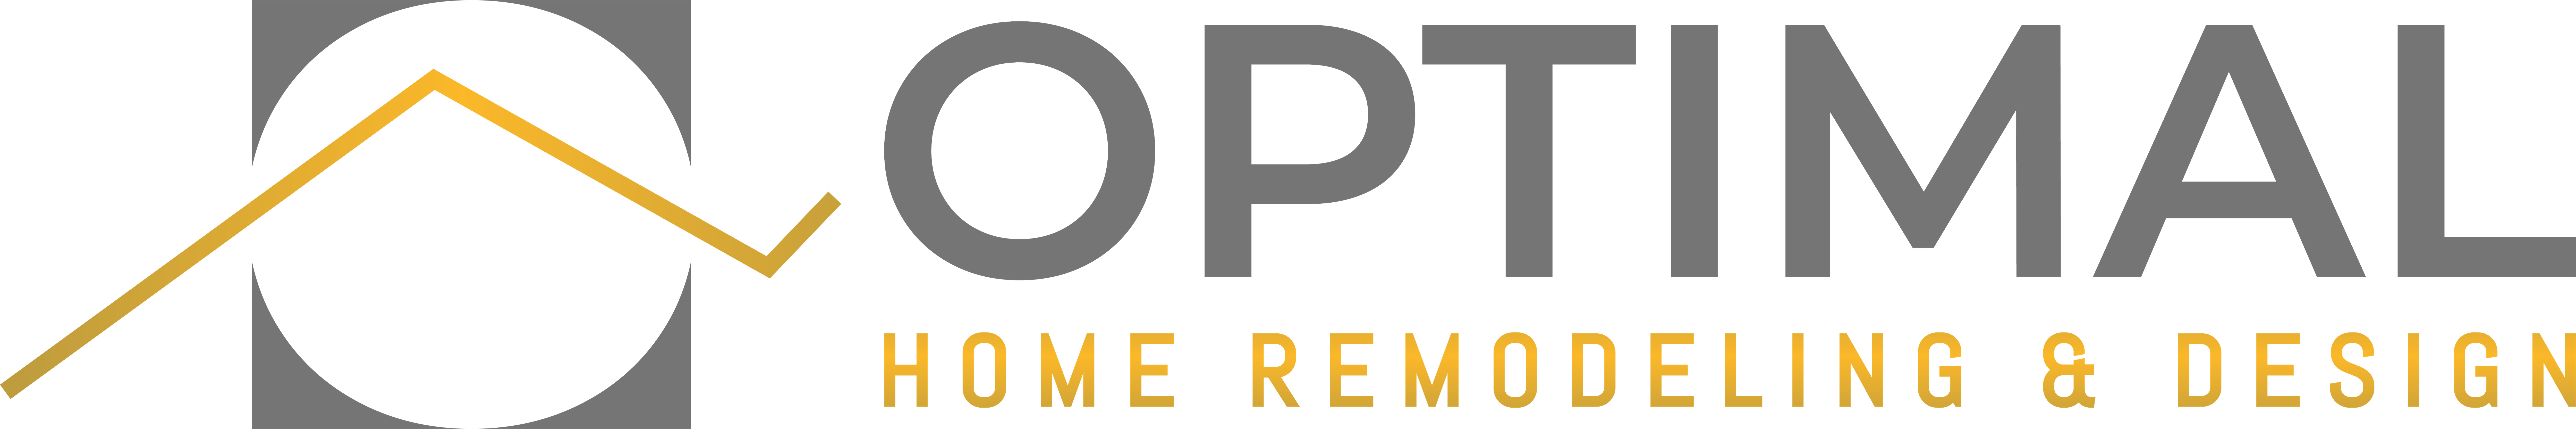 Reputable local remodeling services provider, Optimal Home Remodeling and Design, helps homeowners Bring their Home Back to Life